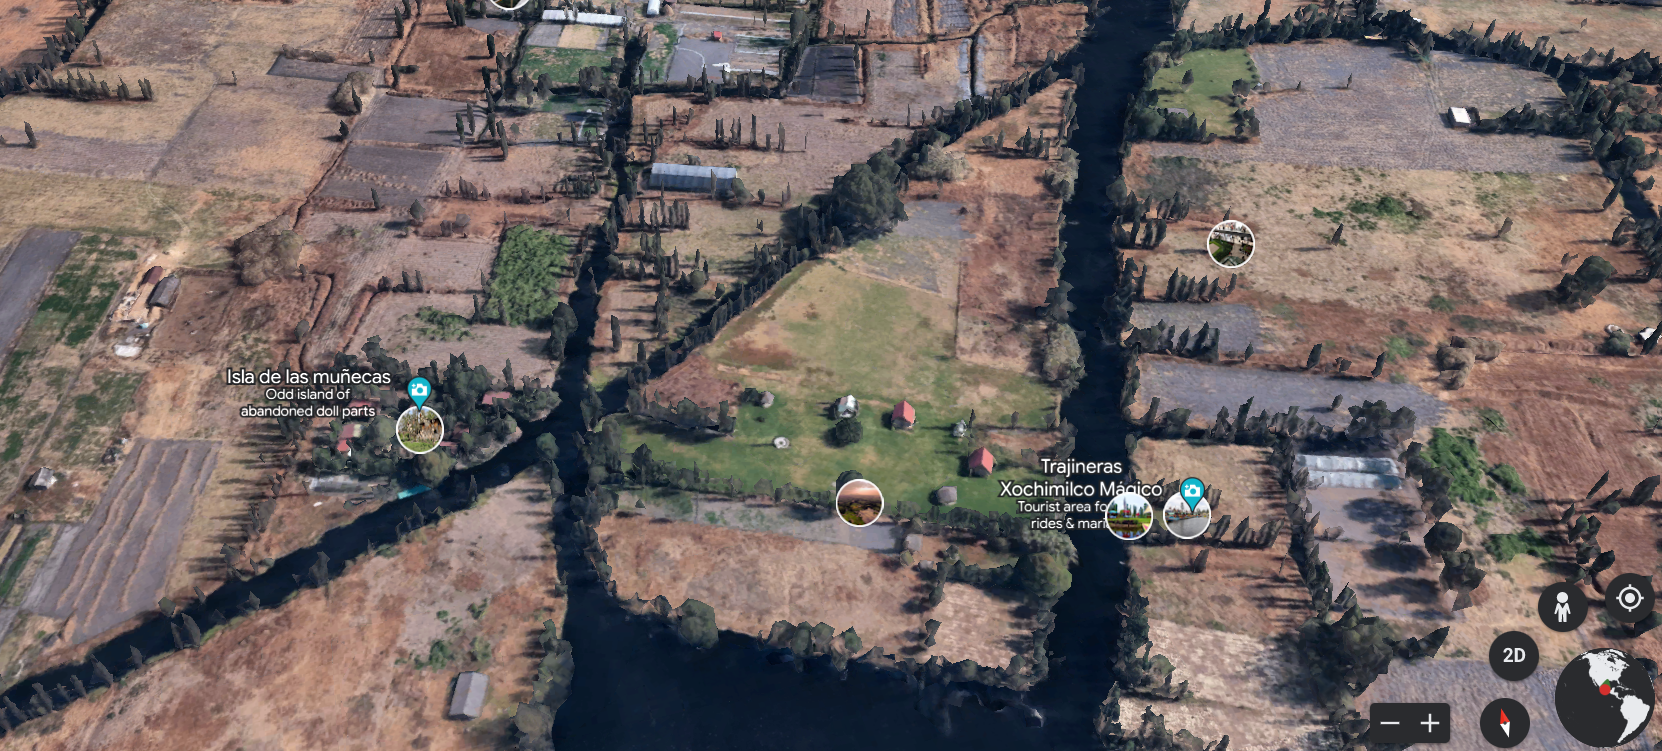 The island of dolls near the Xochimilco canals on Google Earth.